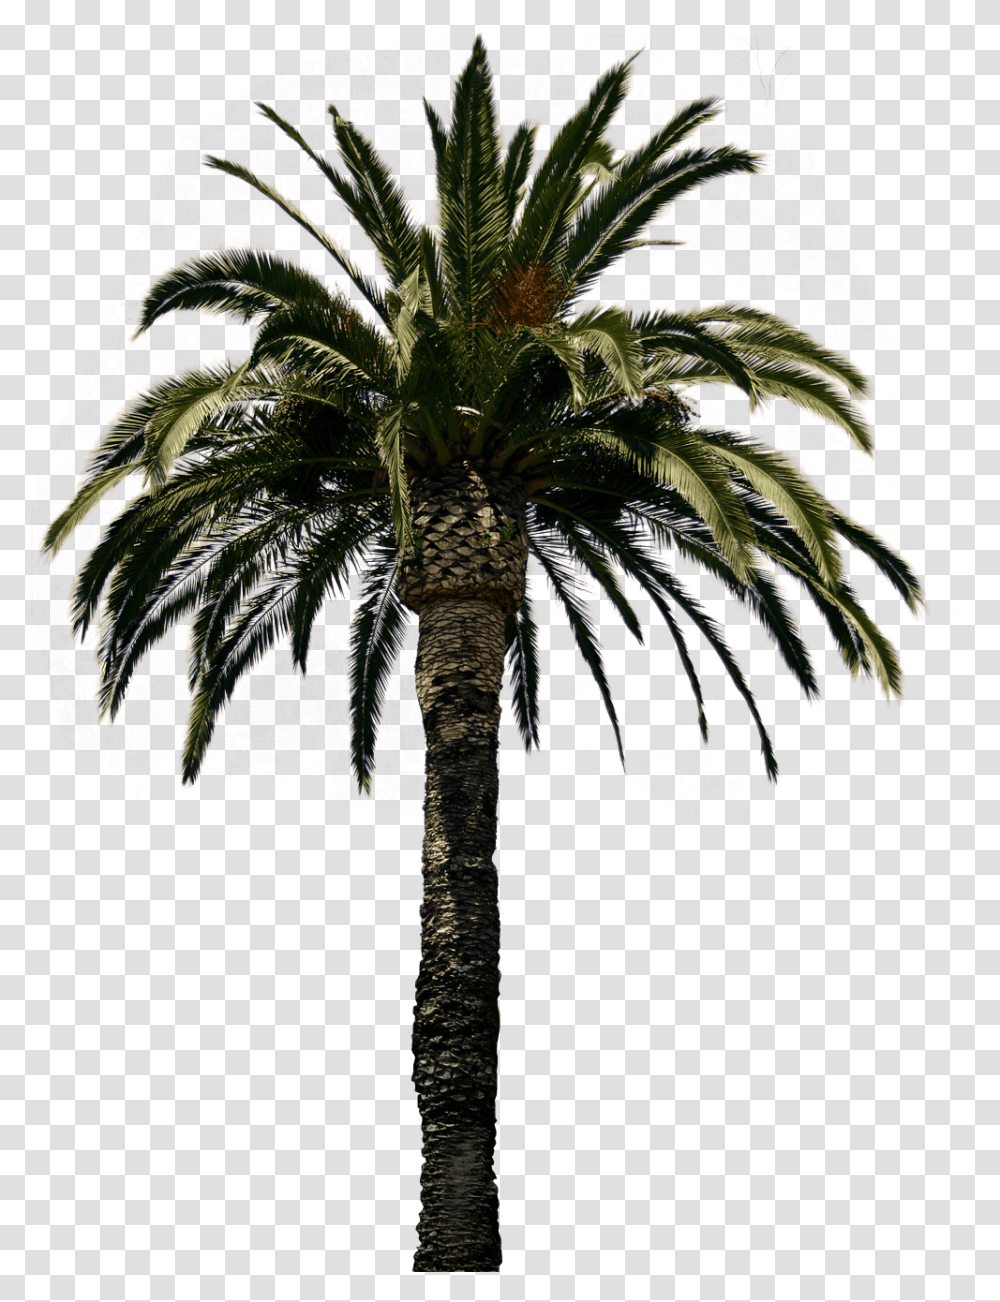 Real Palm Tree 43067 Free Icons And Real Palm Trees, Plant, Arecaceae, Cross, Symbol Transparent Png